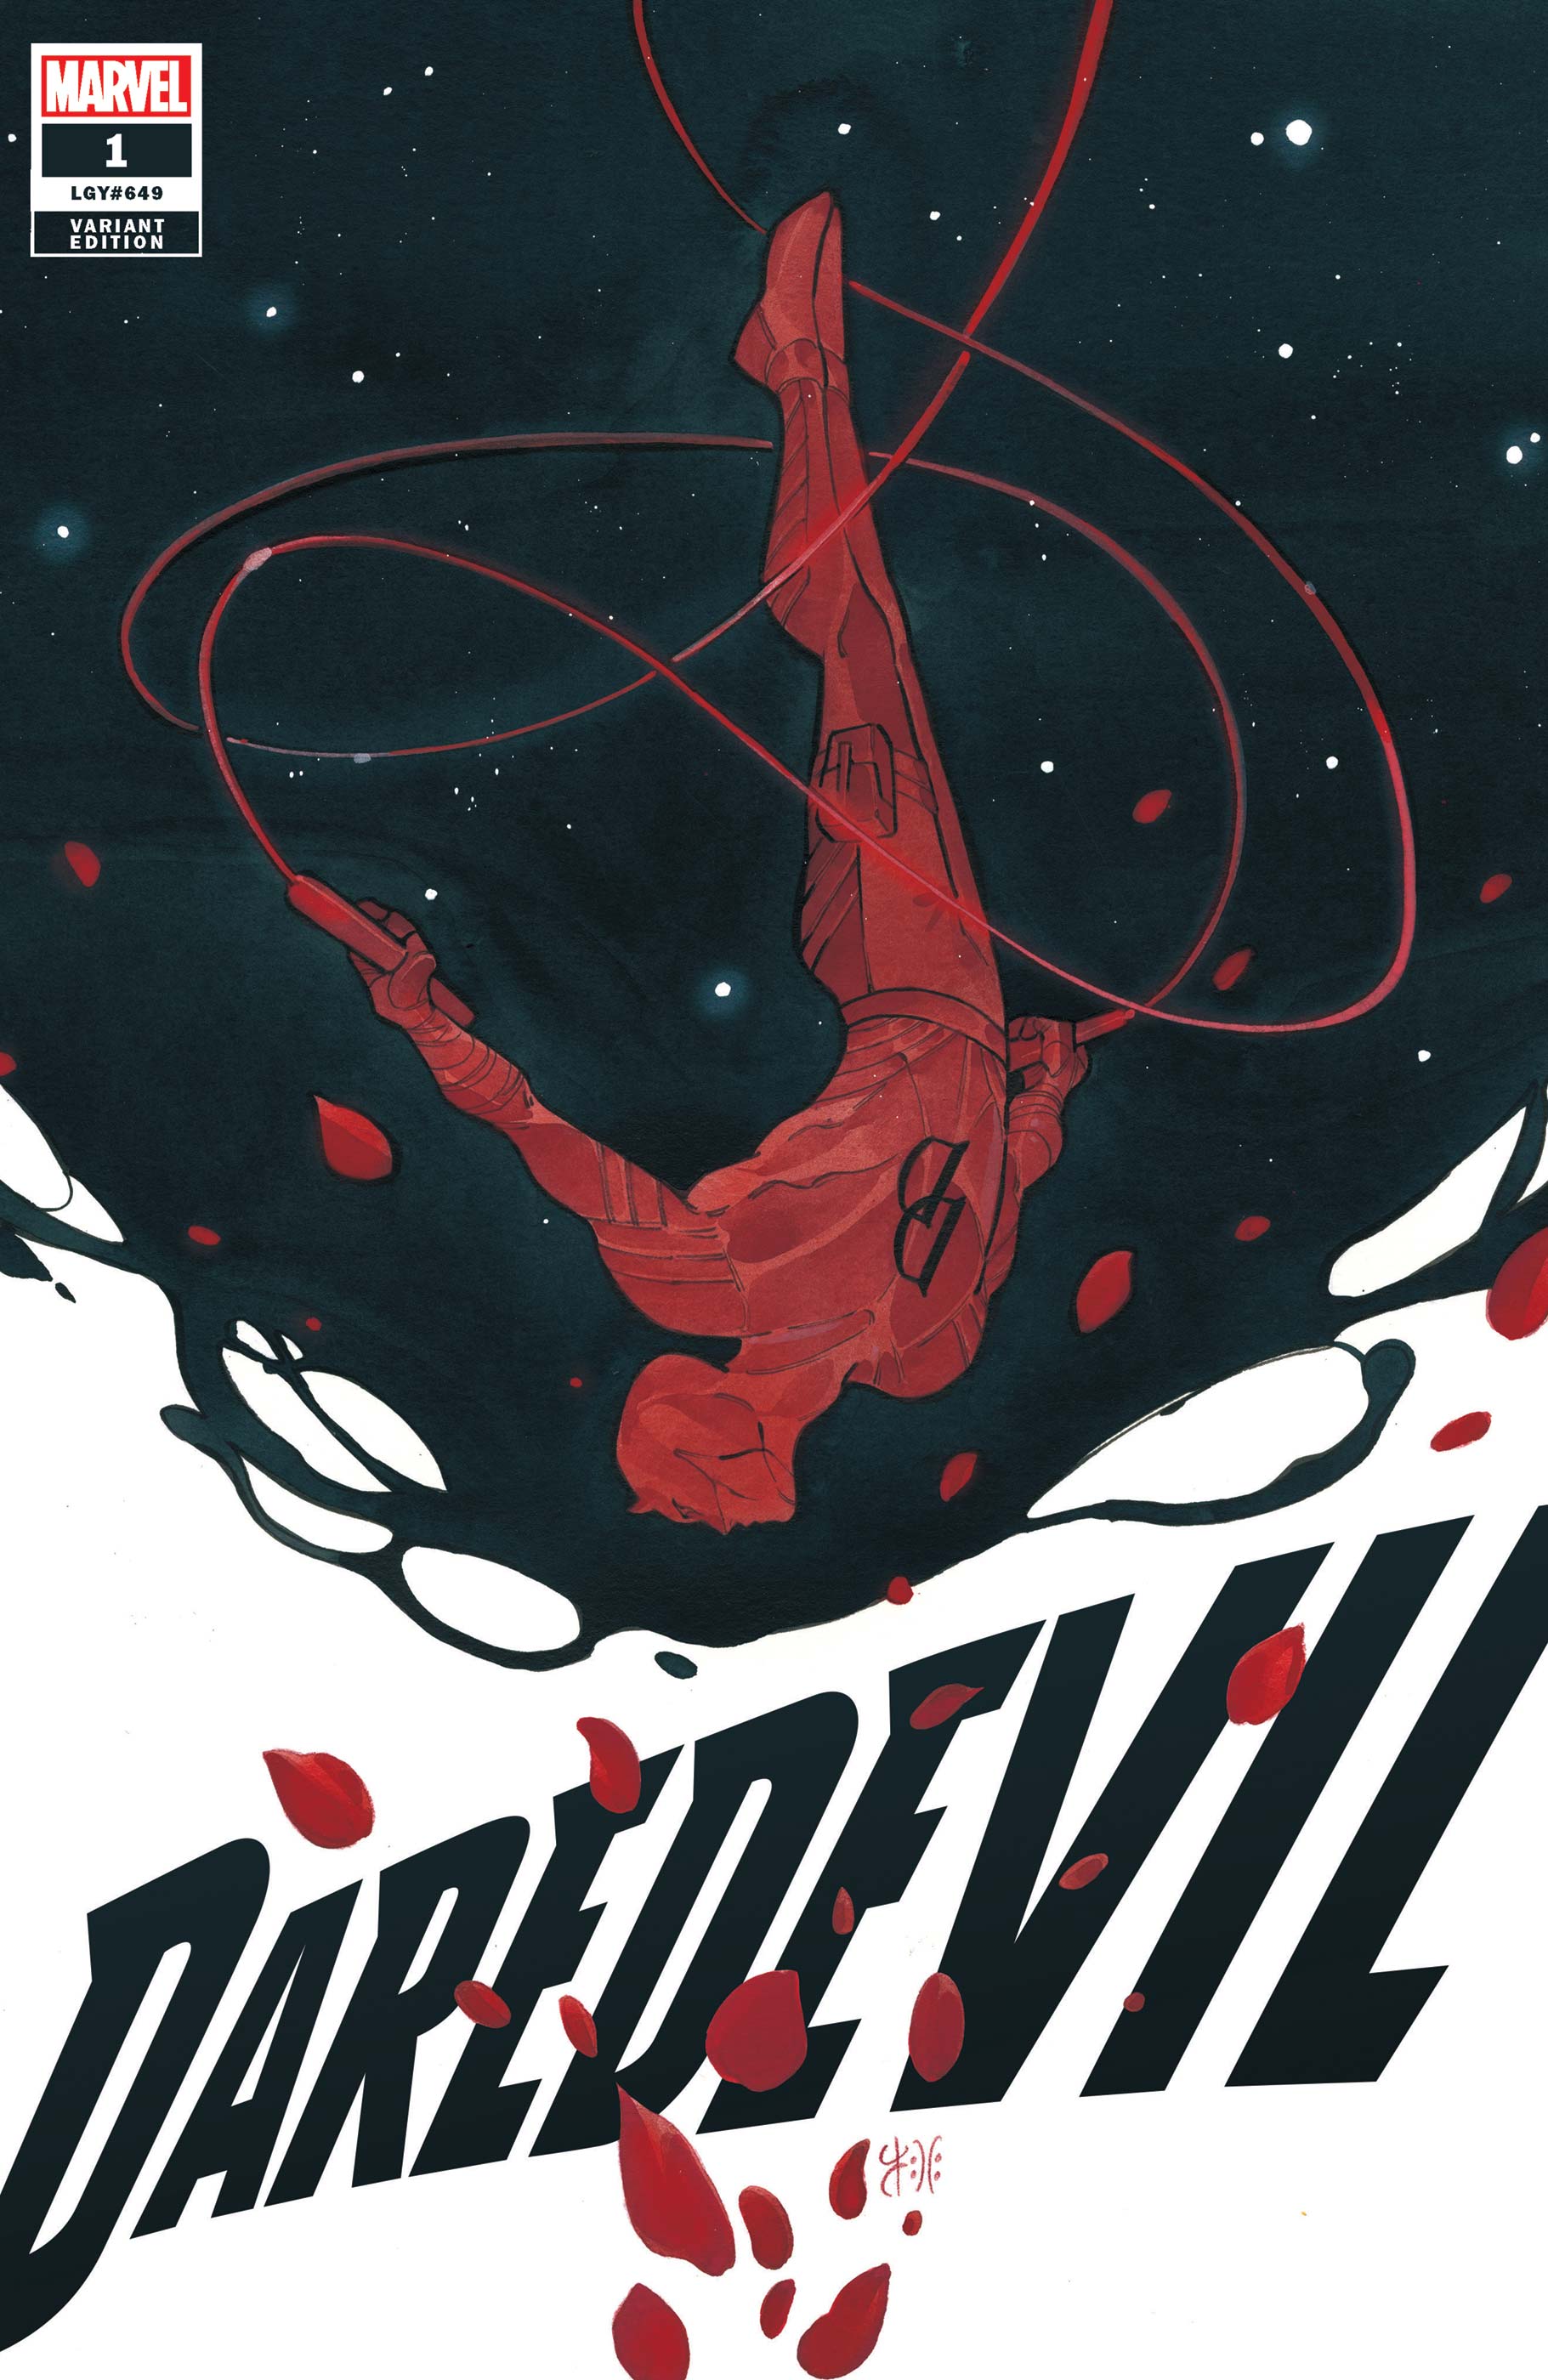 Marvel Unveils Exclusive SDCC Variant Covers for 'Daredevil,' 'Women of  Marvel' & More